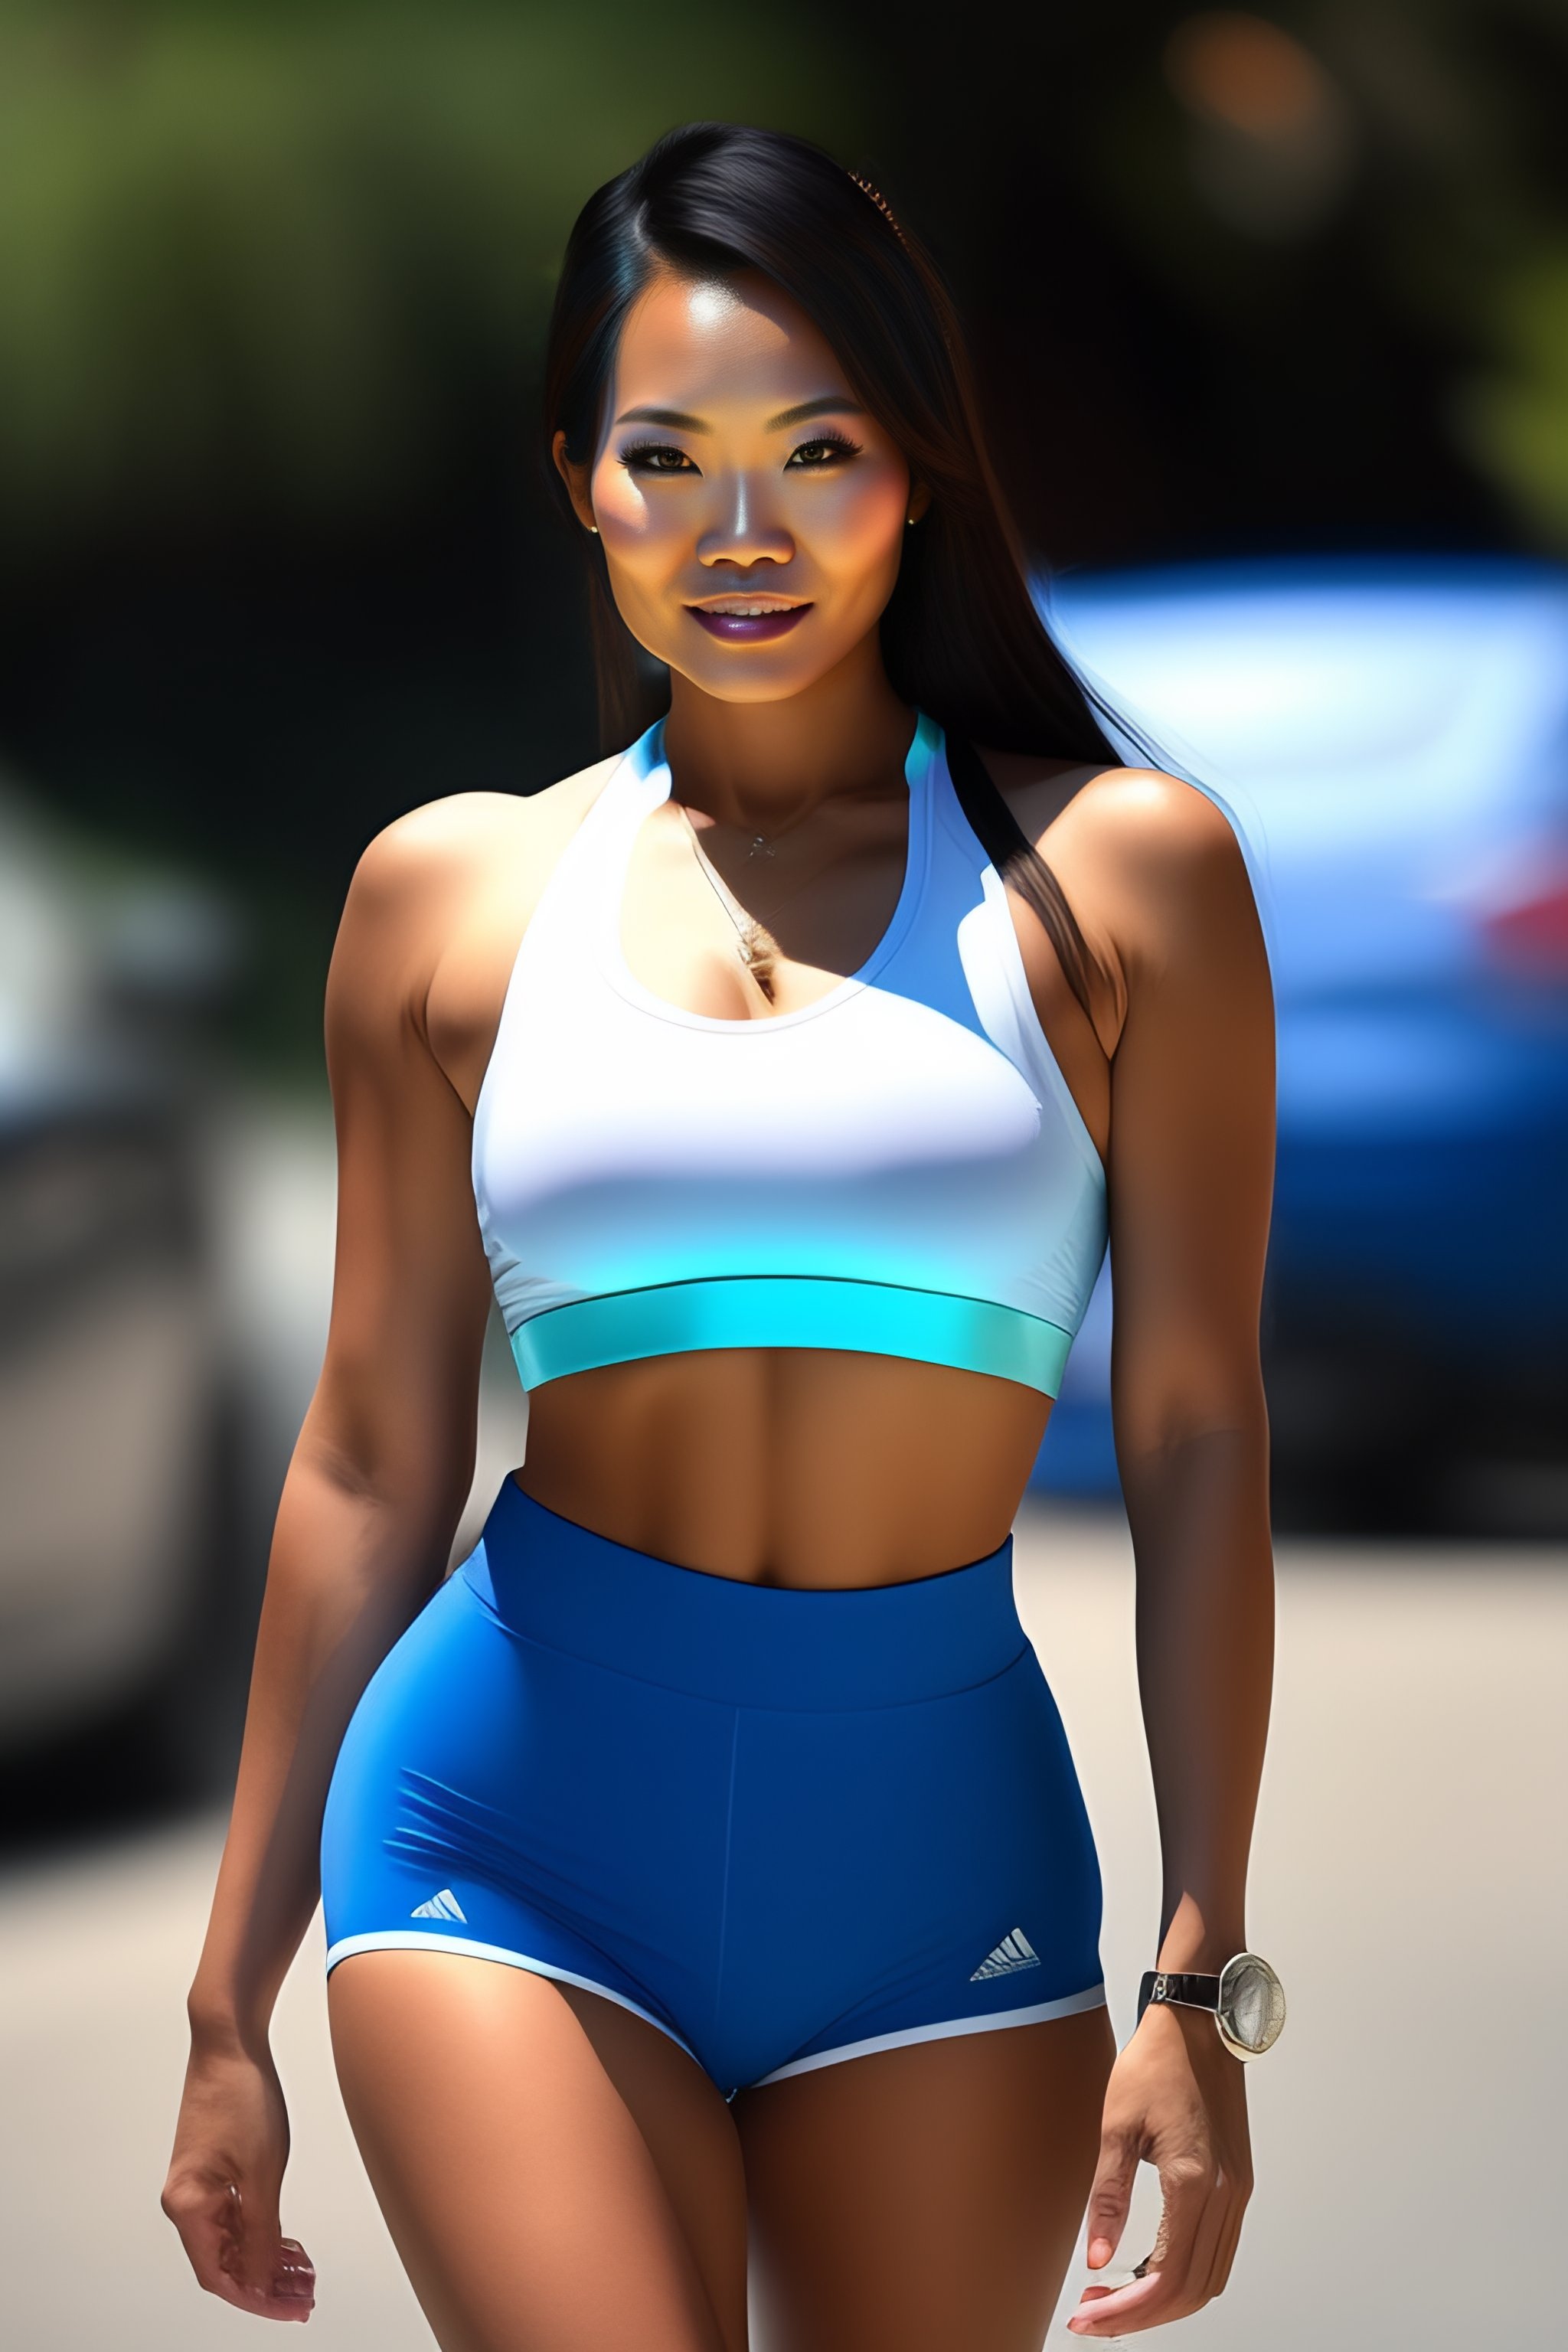 Lexica - Lovely thai woman wearing silver sports bra and blue short shorts